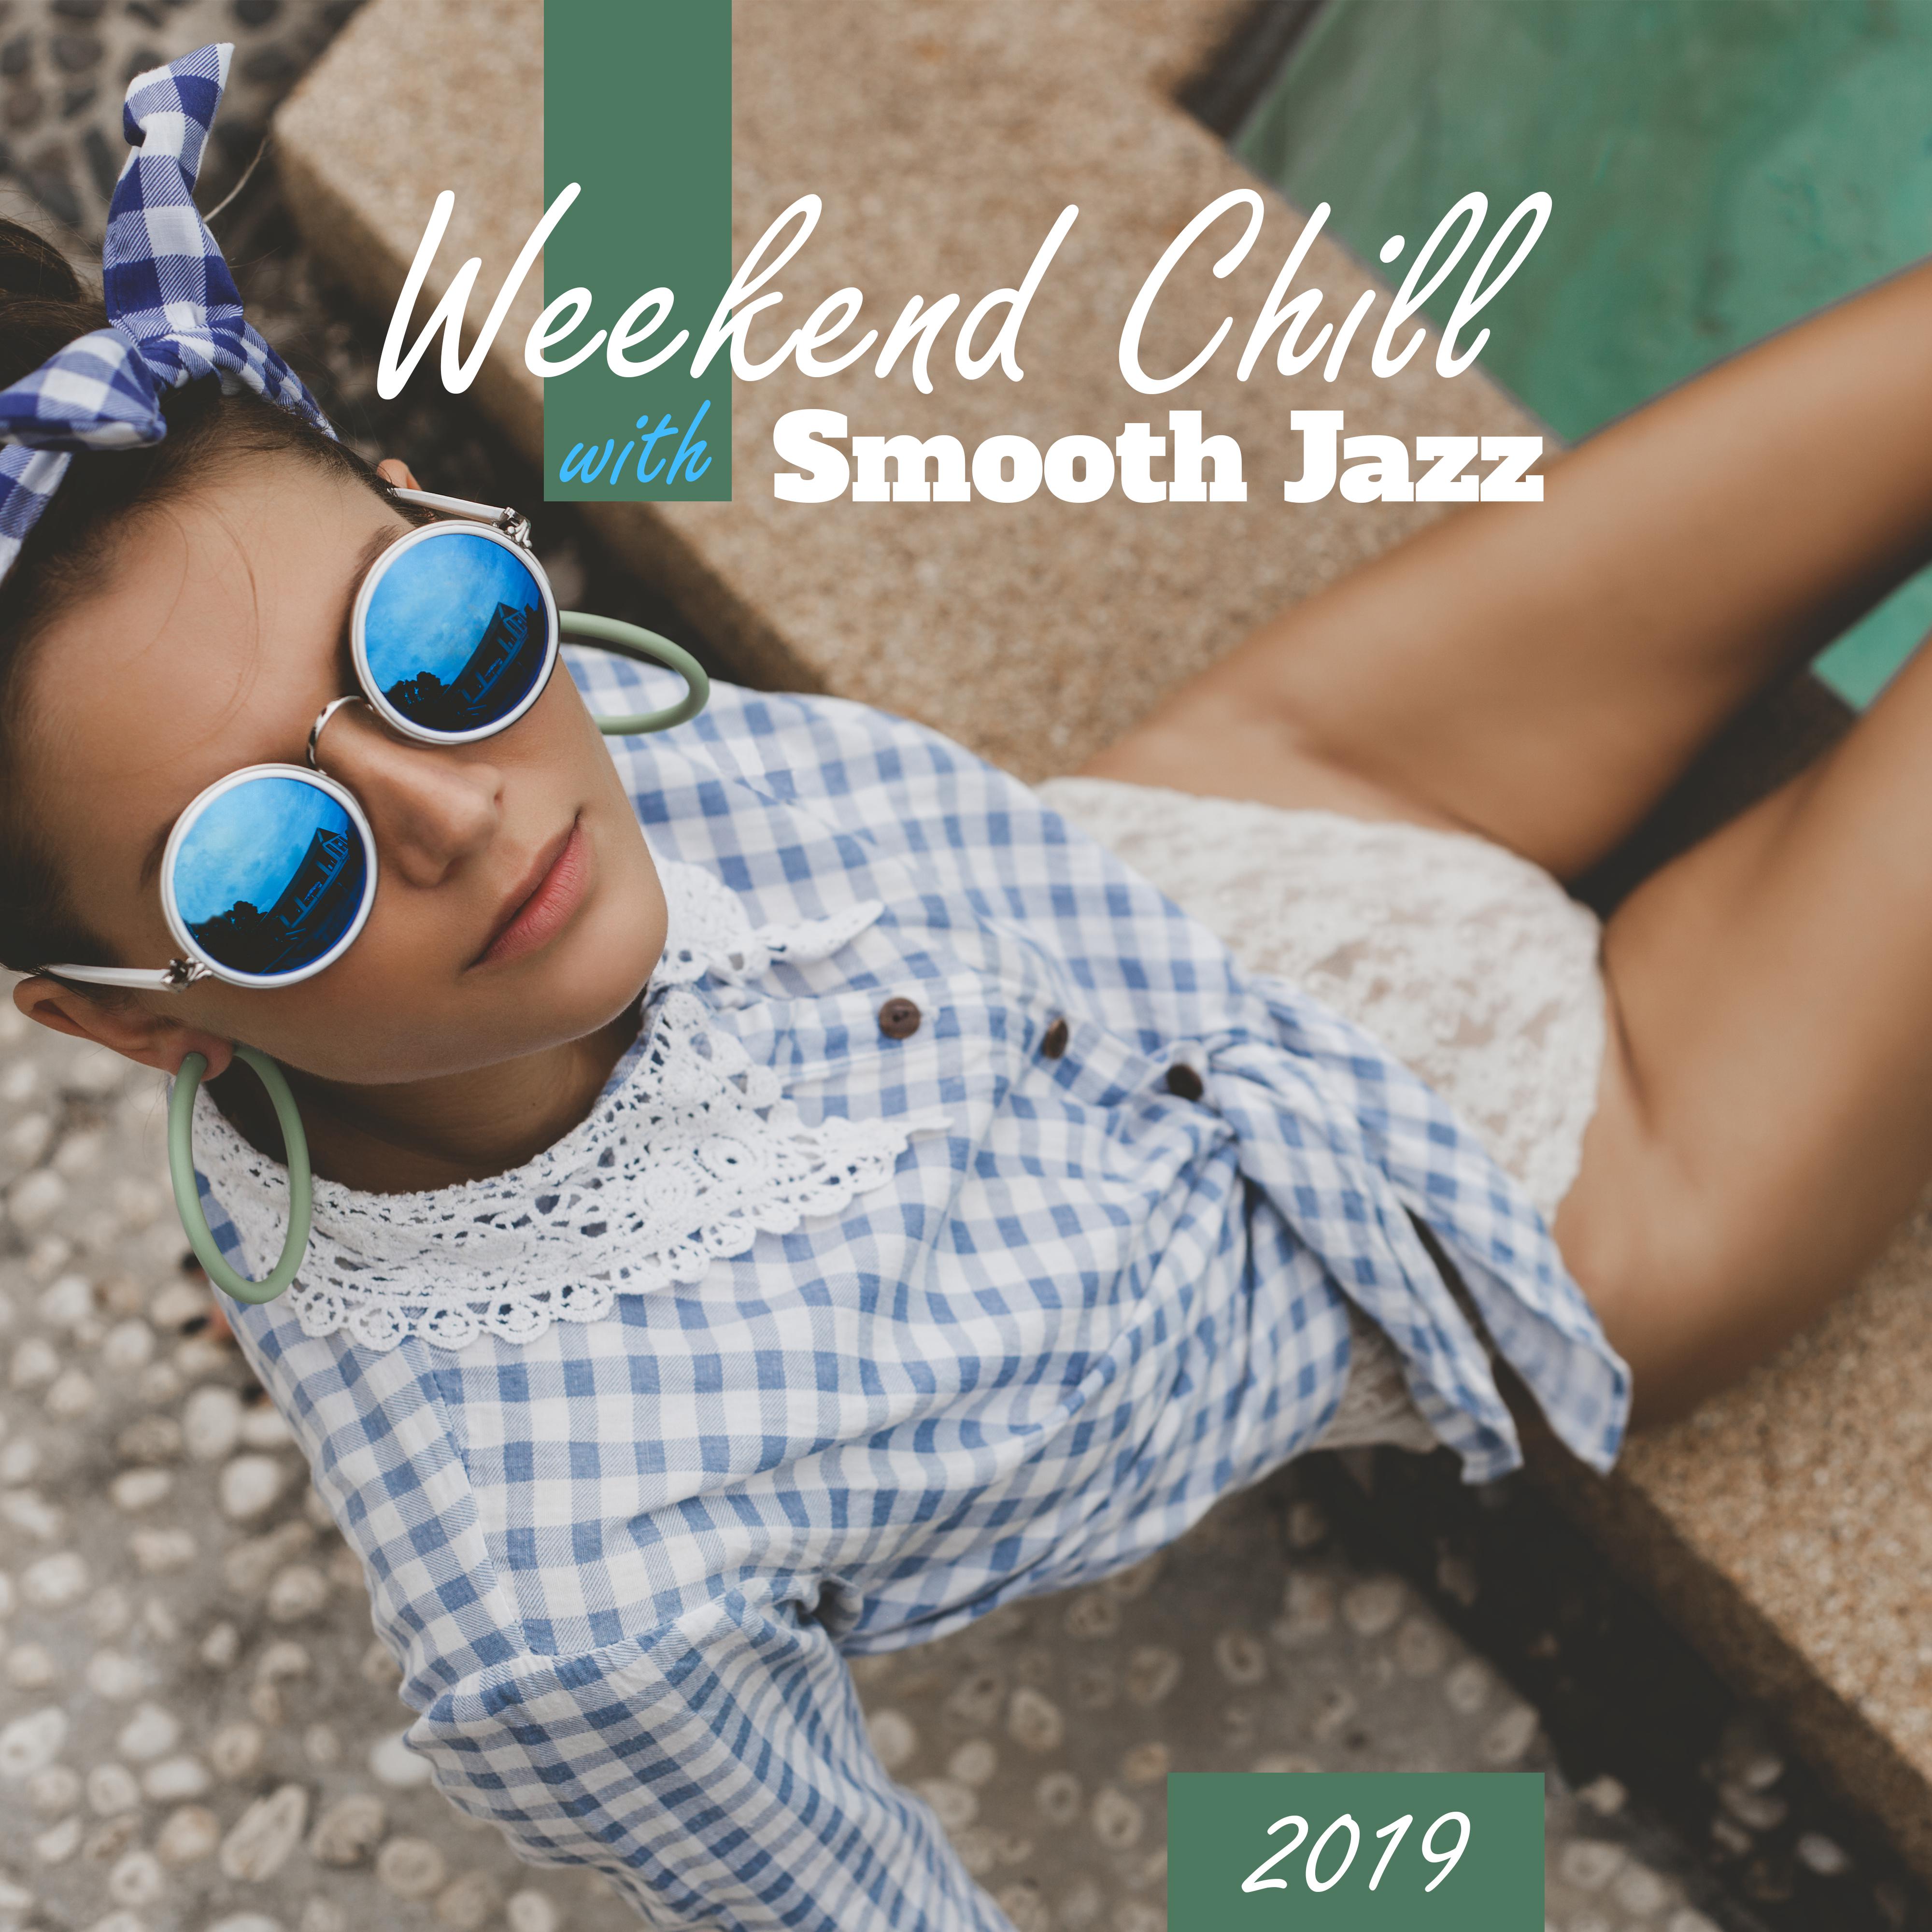 Weekend Chill with Smooth Jazz 2019